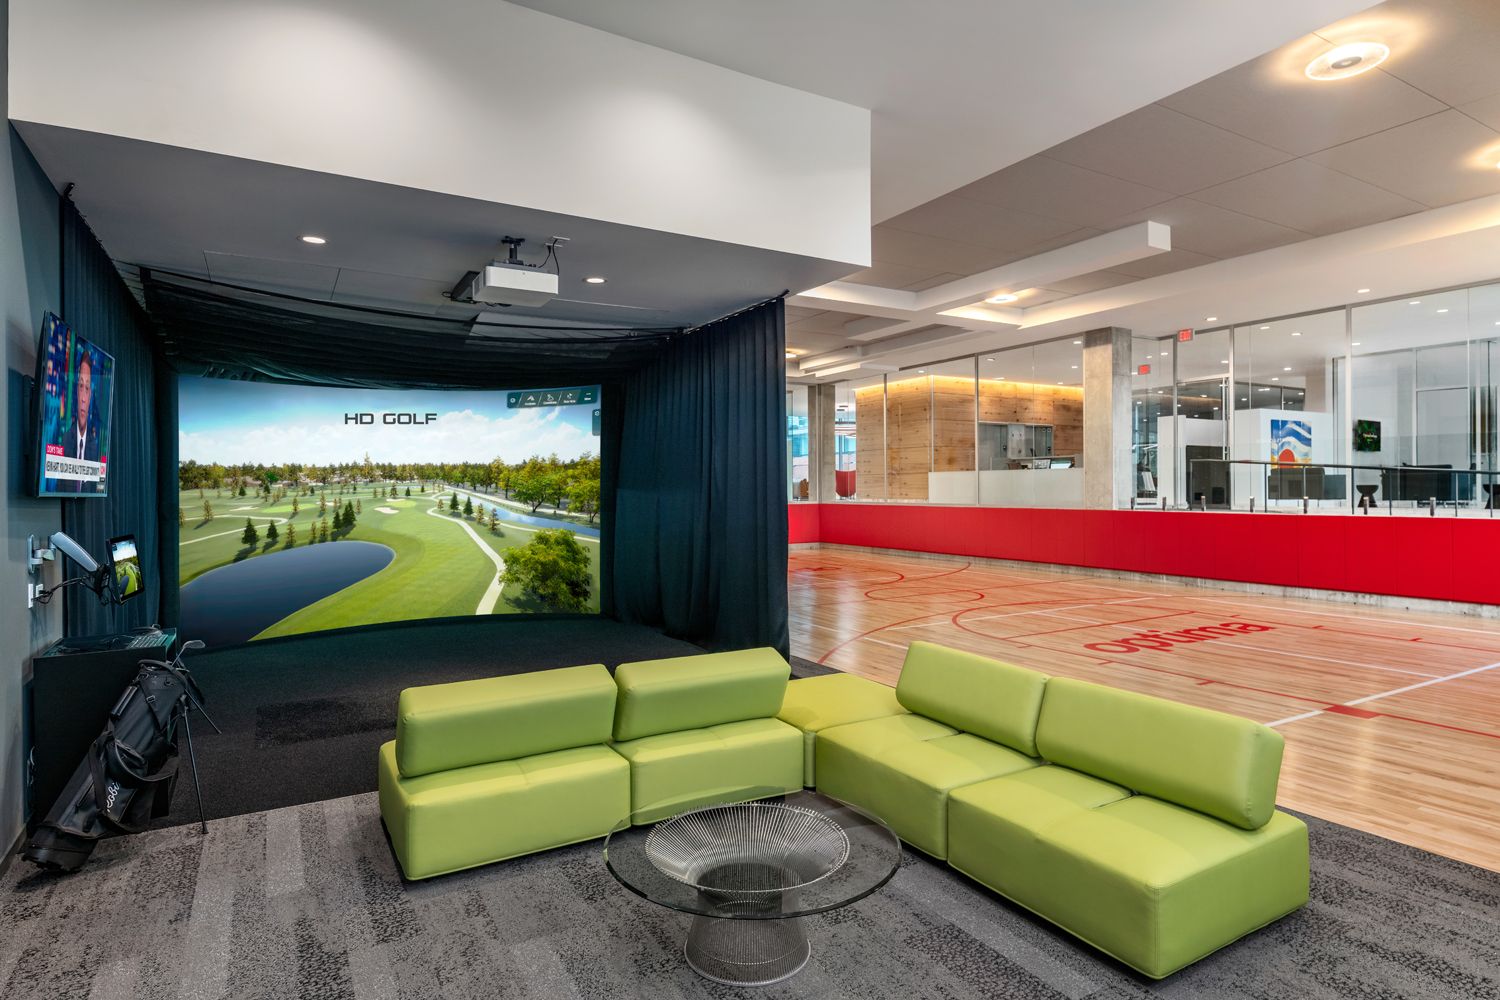 Photo of a basketball court and golf simulator in a lobby 